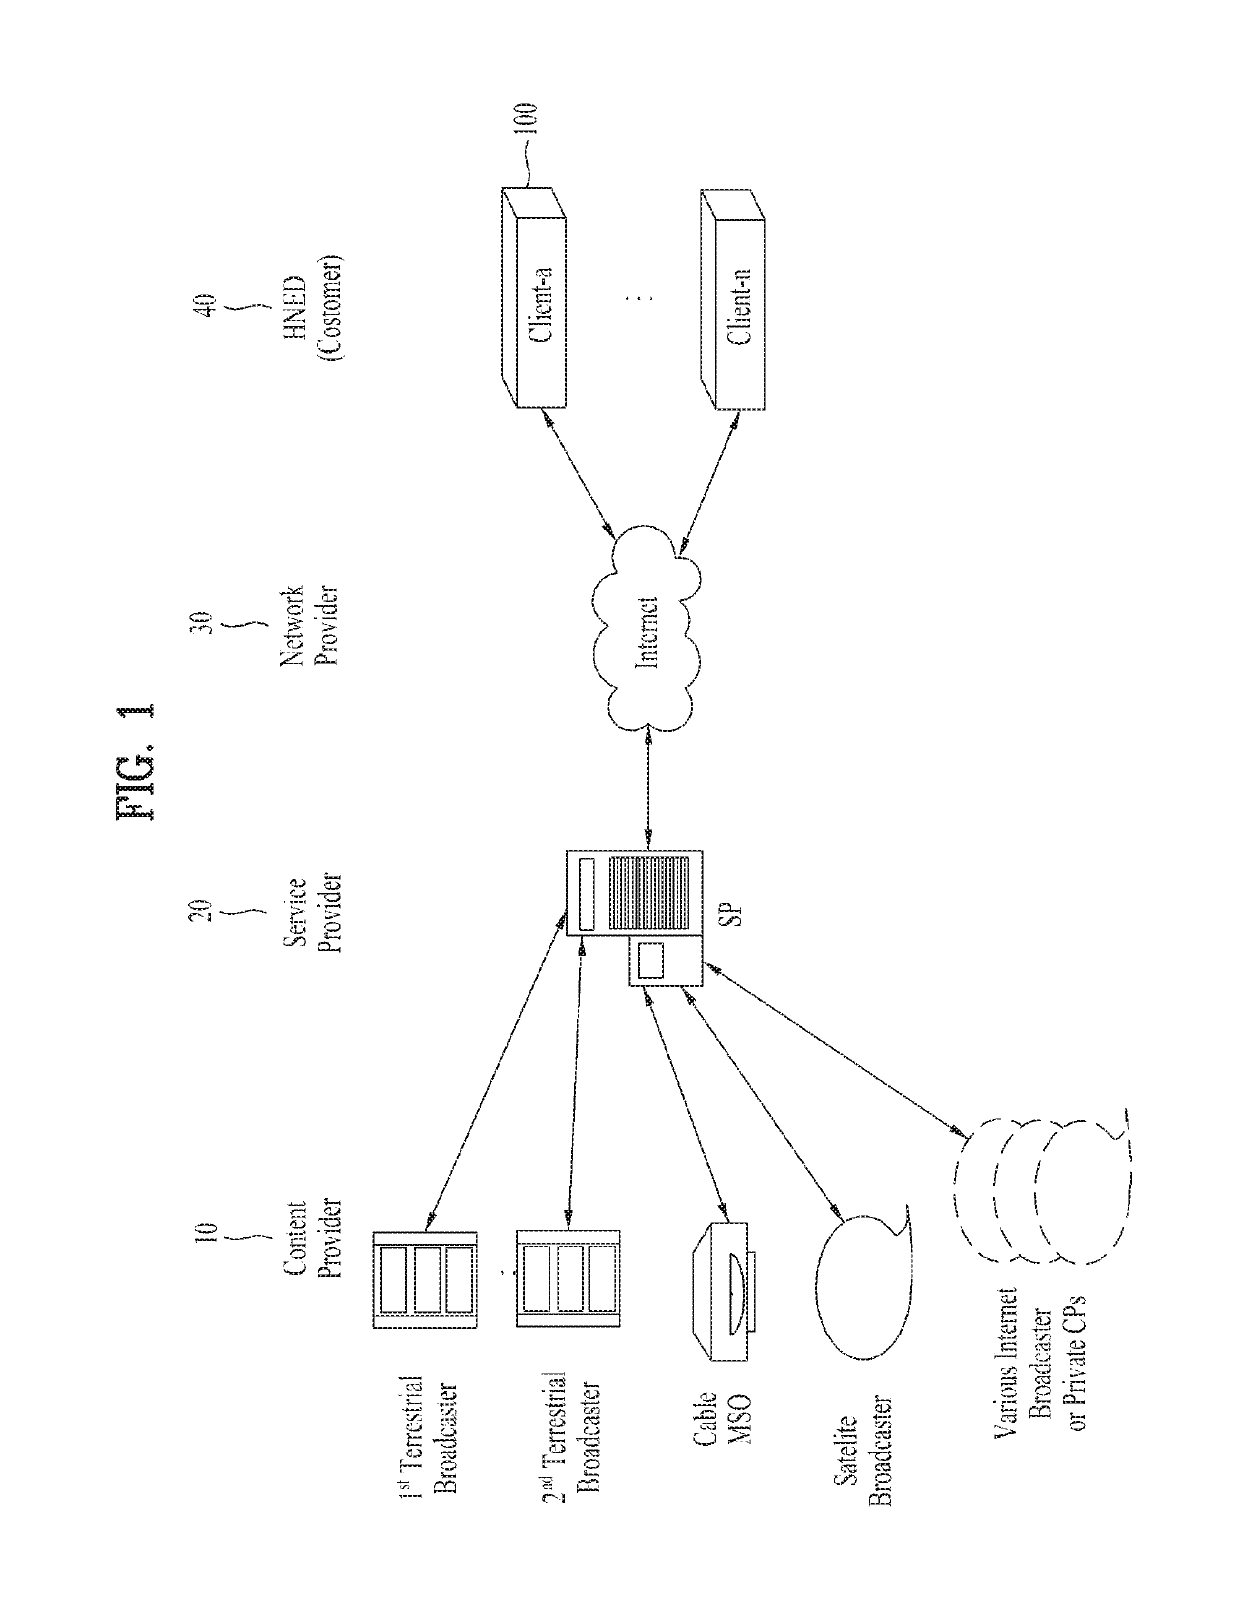 Digital device for improving image quality with low power and control method thereof